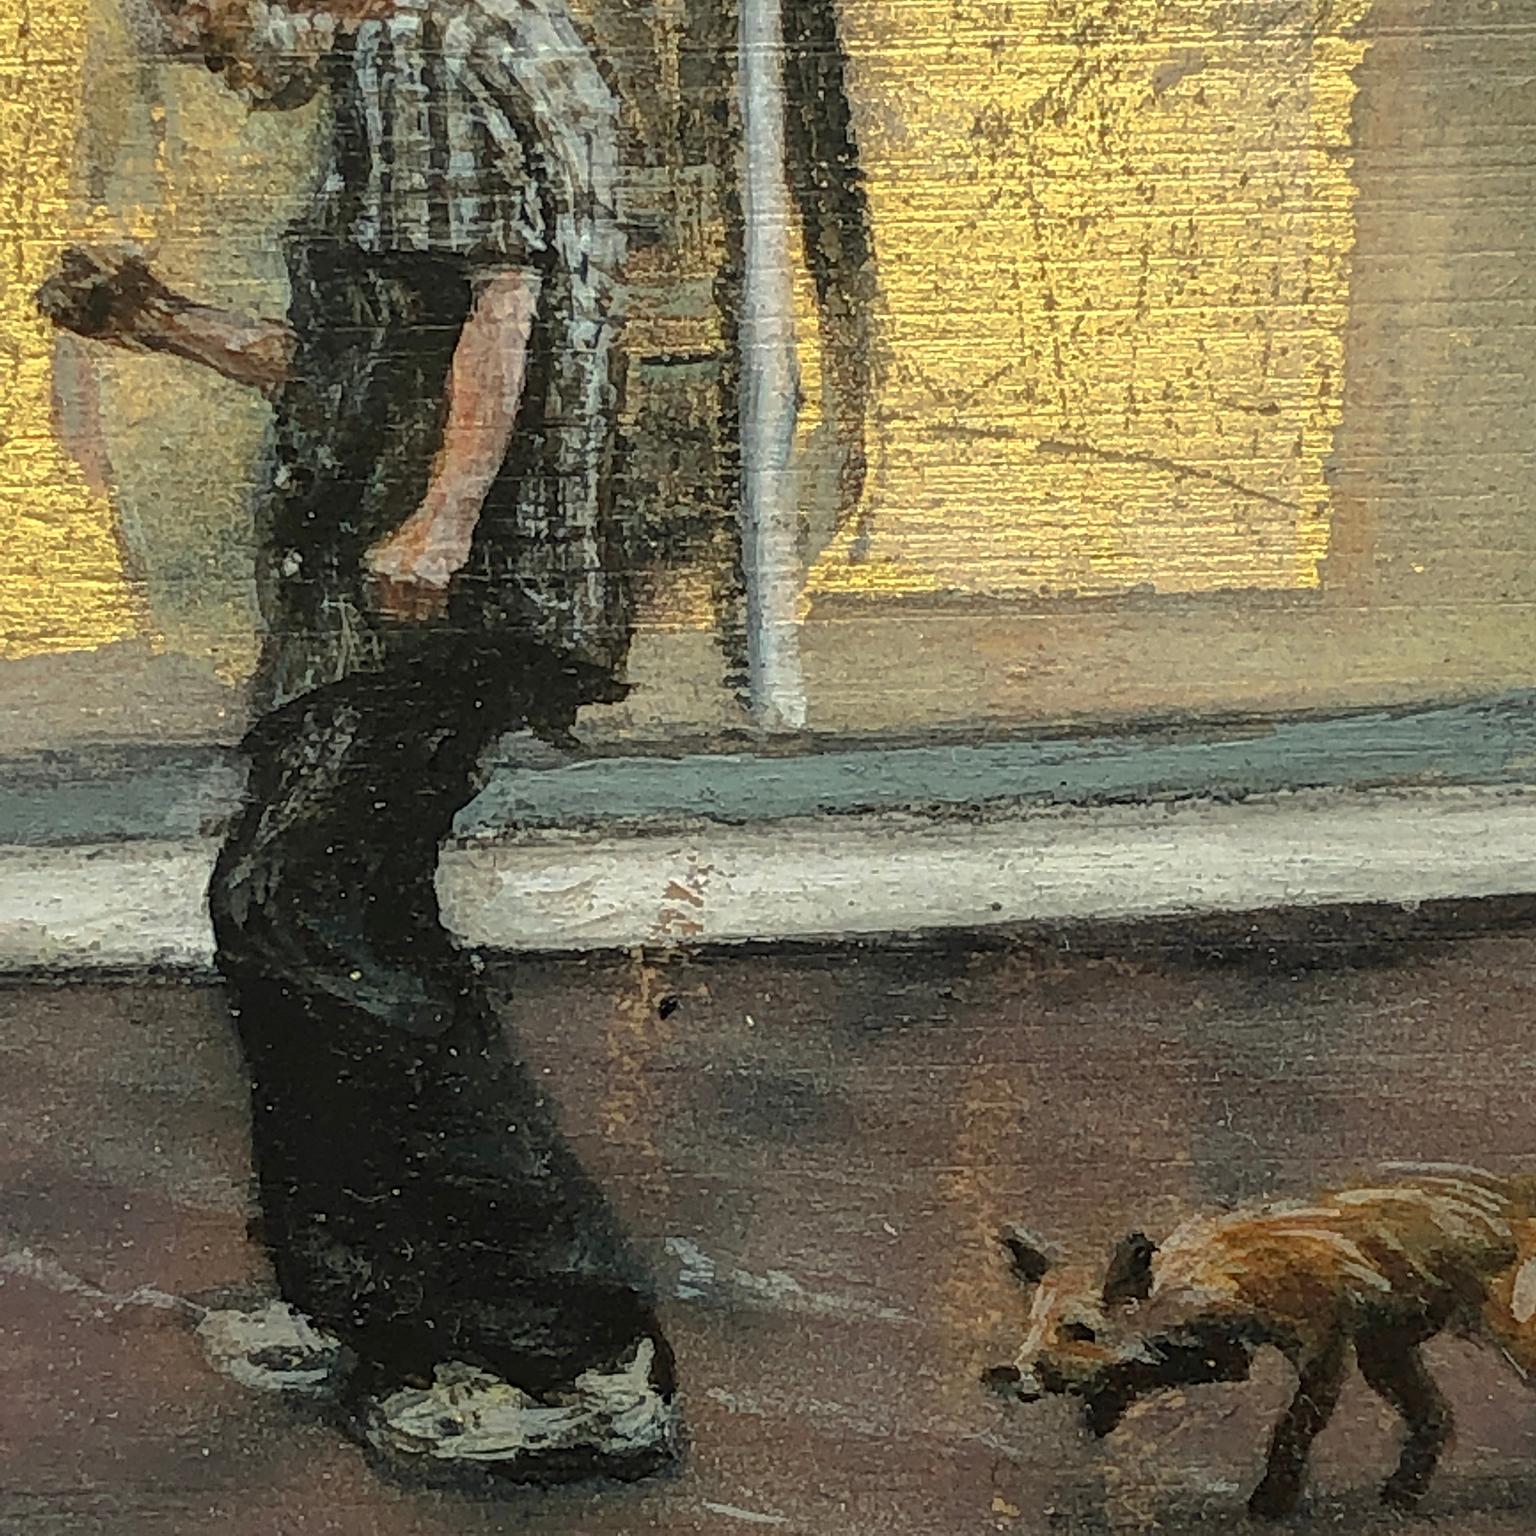 Contemporary Hyper Realist Oil Painting: Fox In The City - Houston - Gold Portrait Painting by Marissa Oosterlee